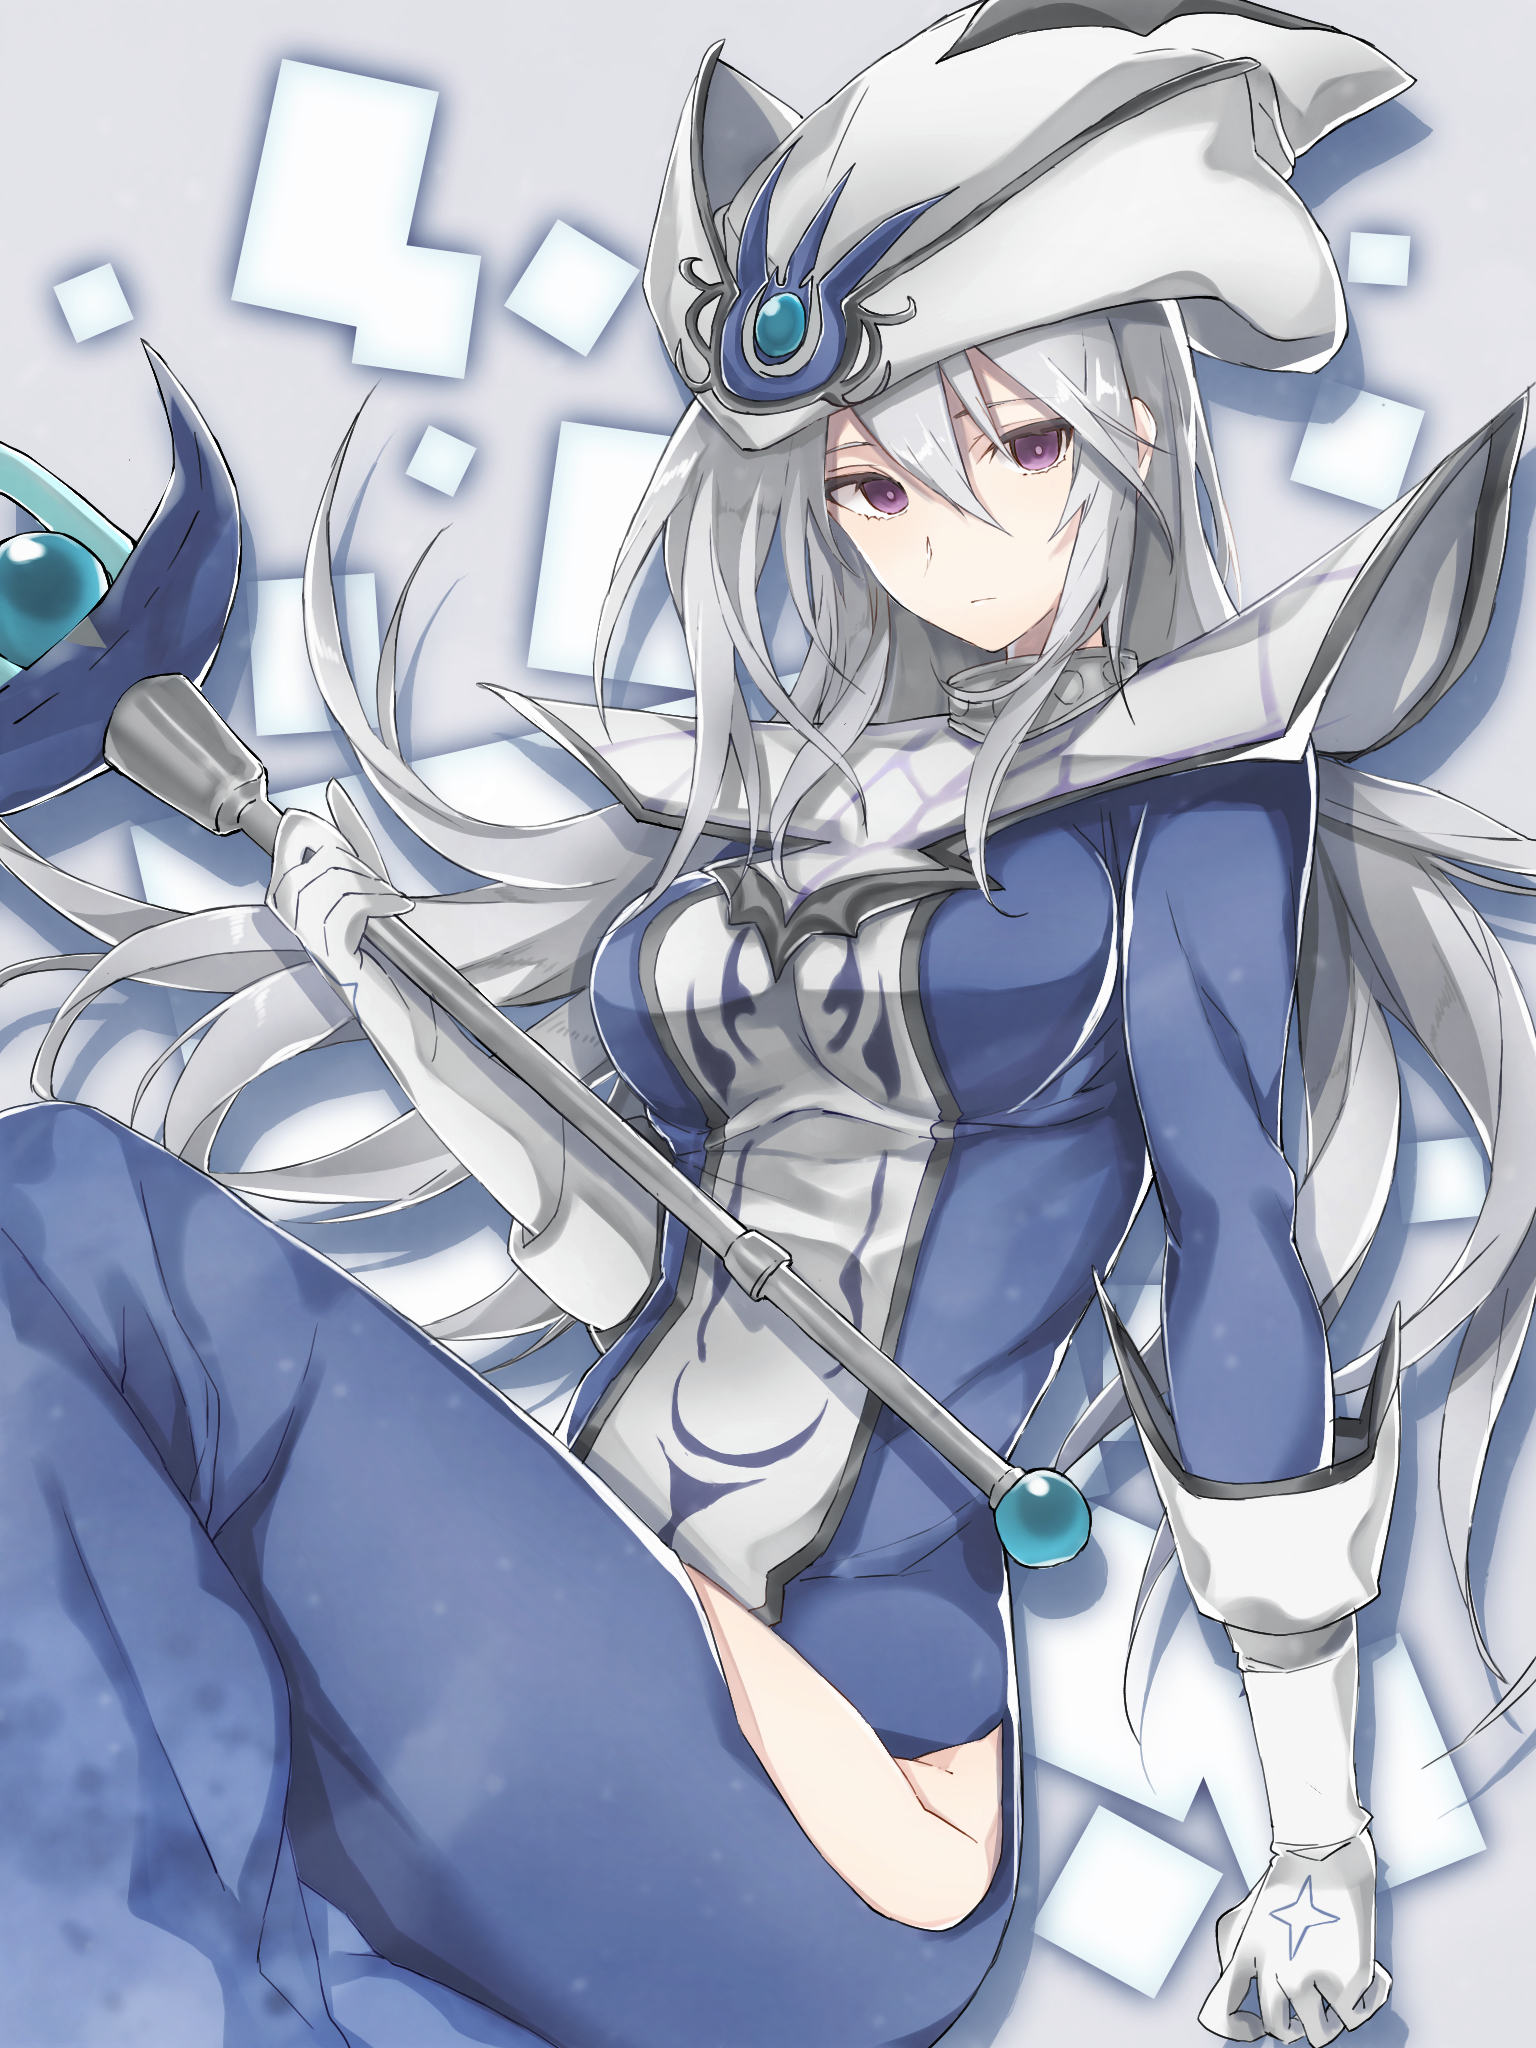 Anime 1536x2048 anime anime girls Yu-Gi-Oh! Silent Magician witch witch hat long hair white hair boobs